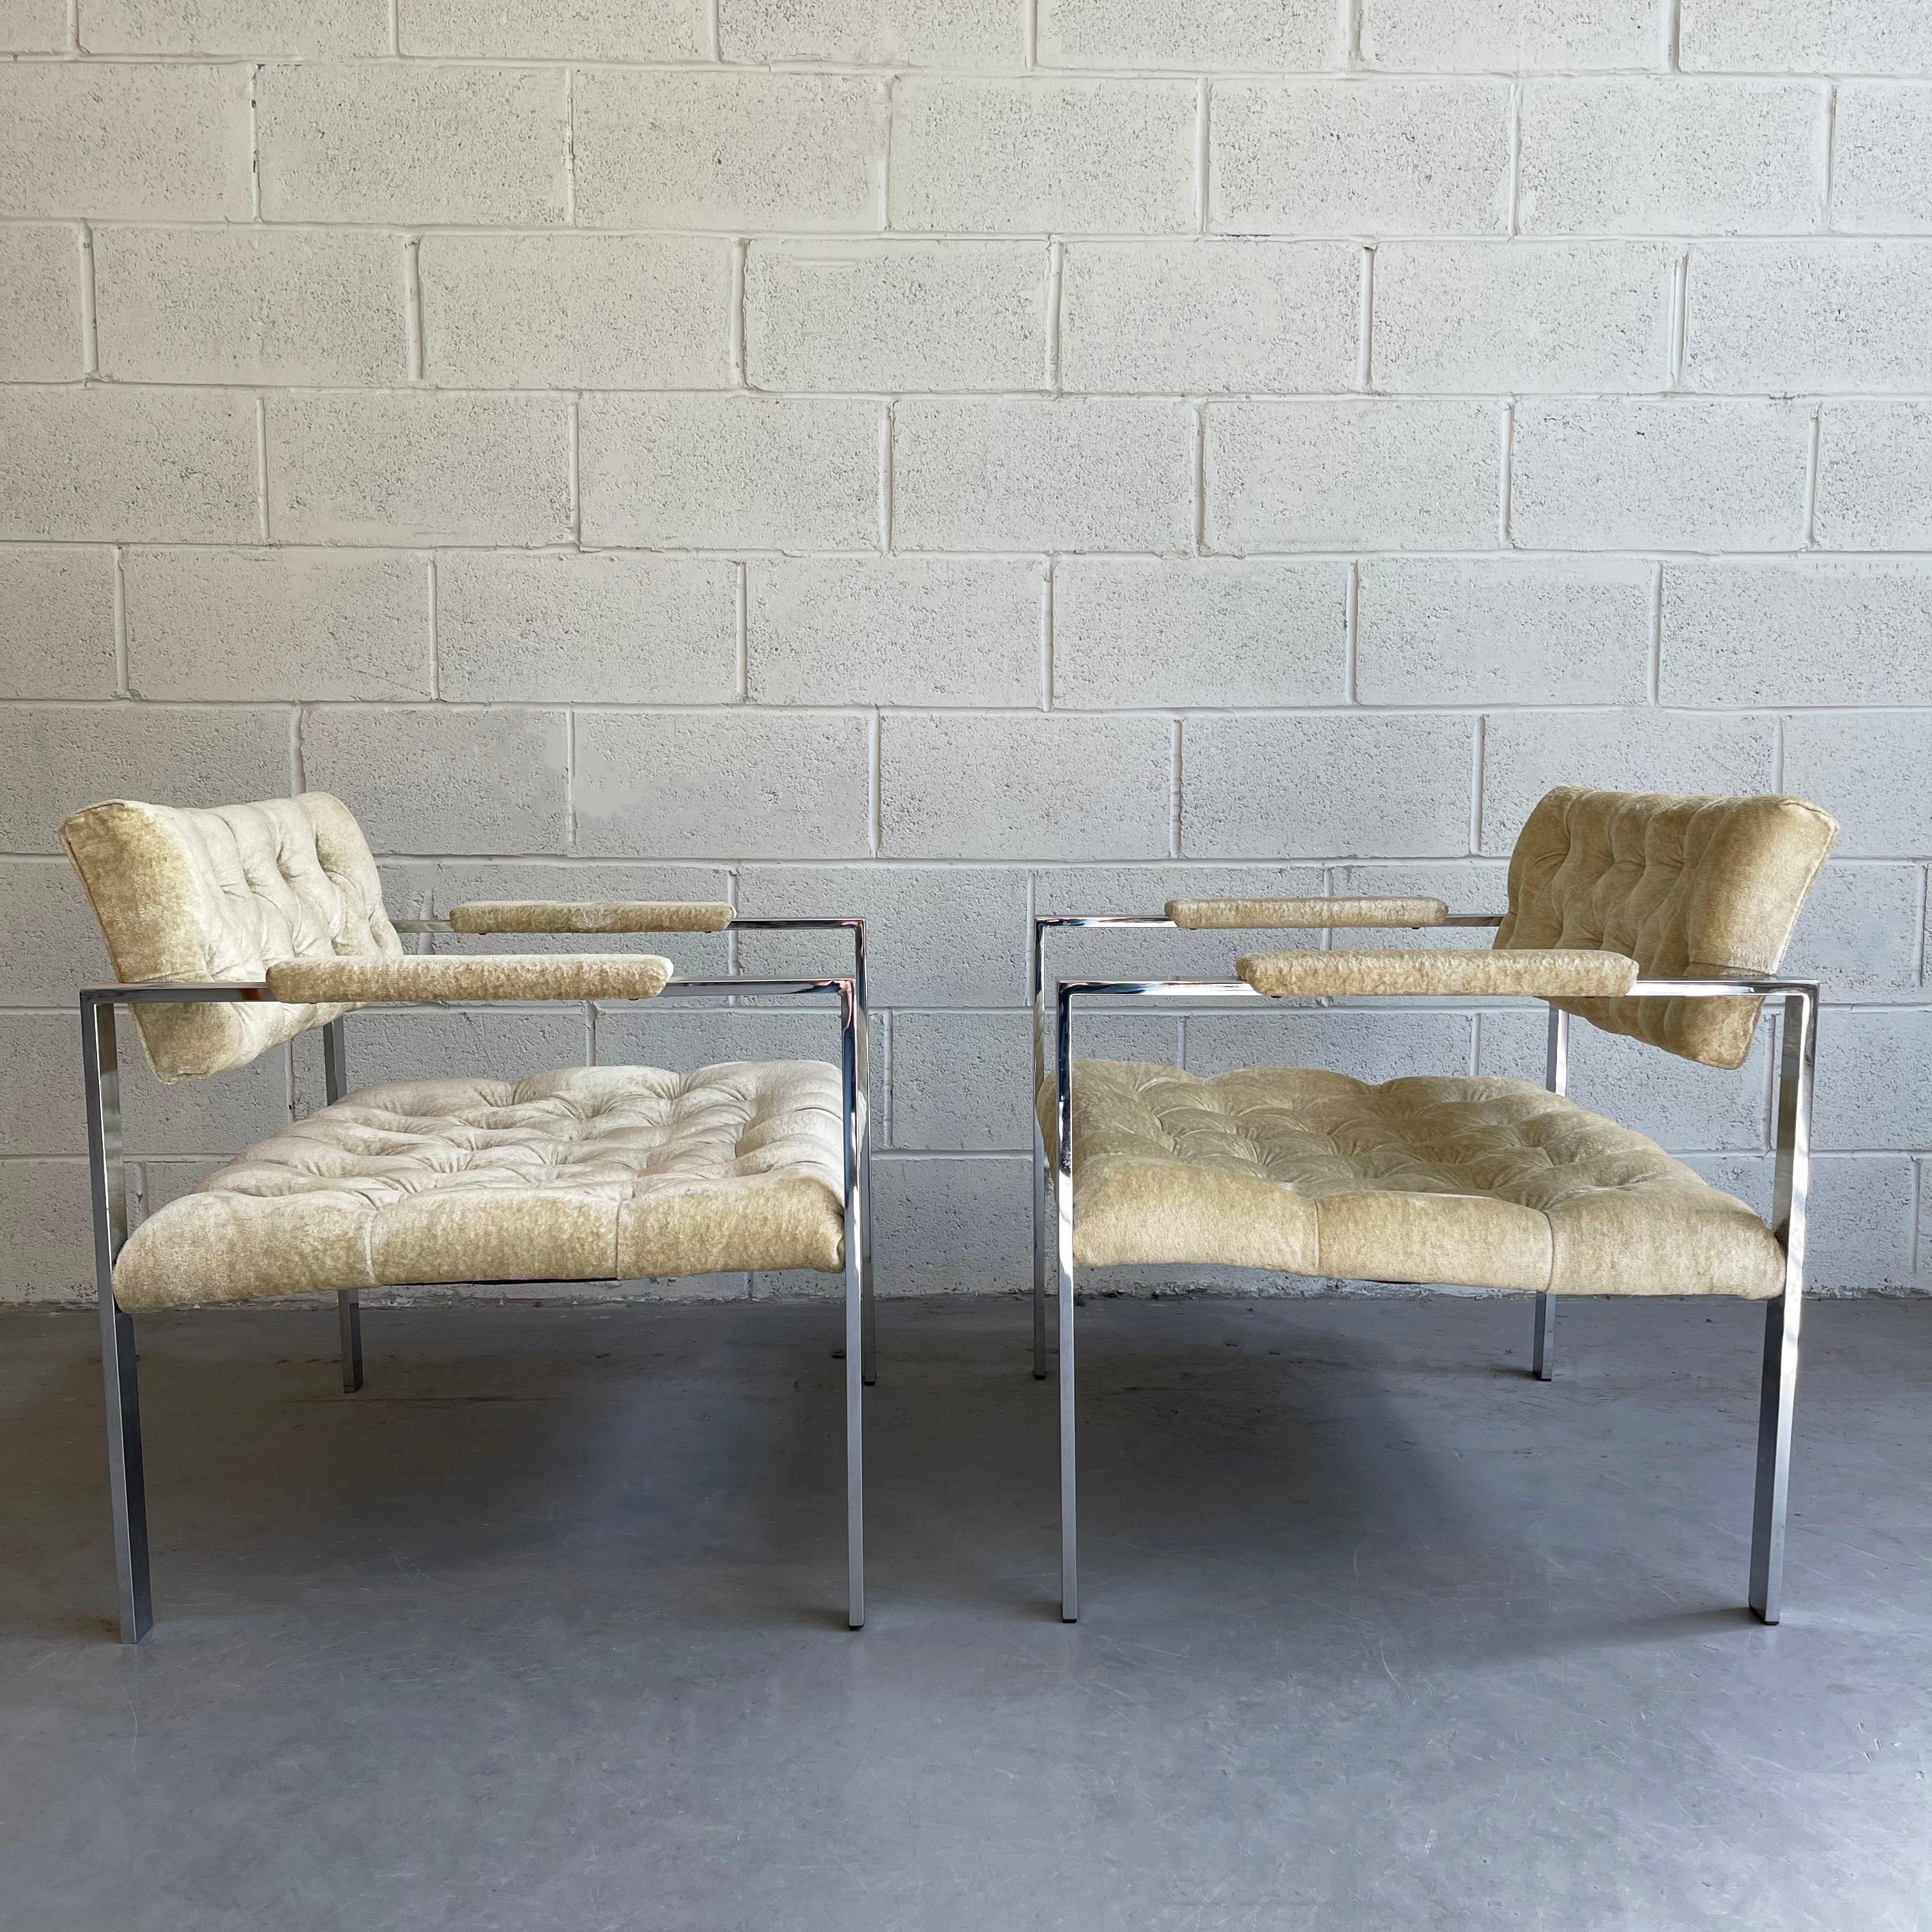 Pair of Mid-Century Modern, flat bar, chrome lounge chairs upholstered in tufted, pale celery, champagne velvet by Erwin-Lambeth in the manner of Milo Baughman.